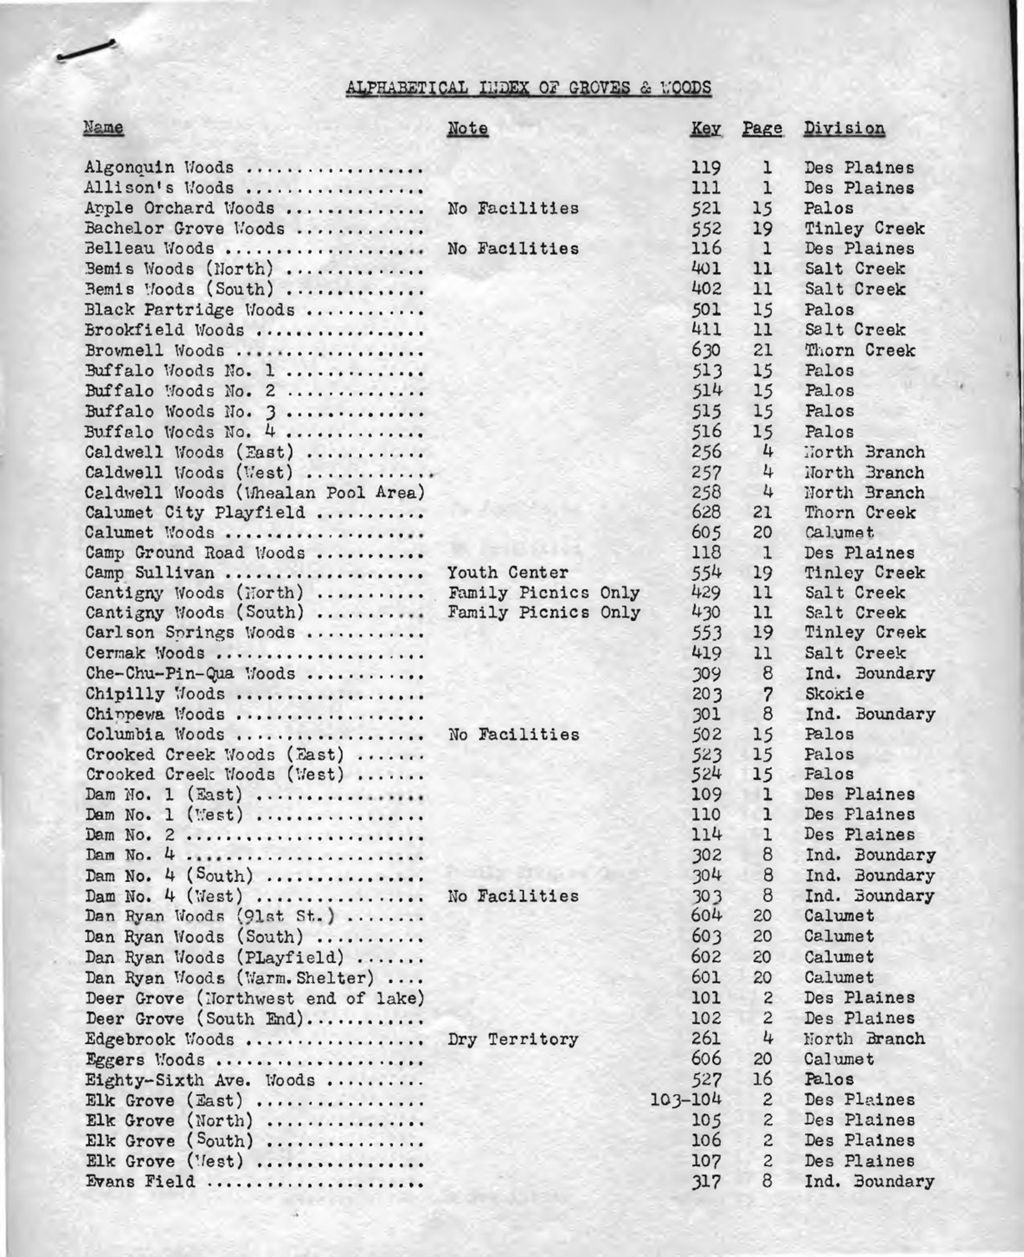 Historical Alphabetical listing of Groves, Woods, Sports Centers, etc., 1955